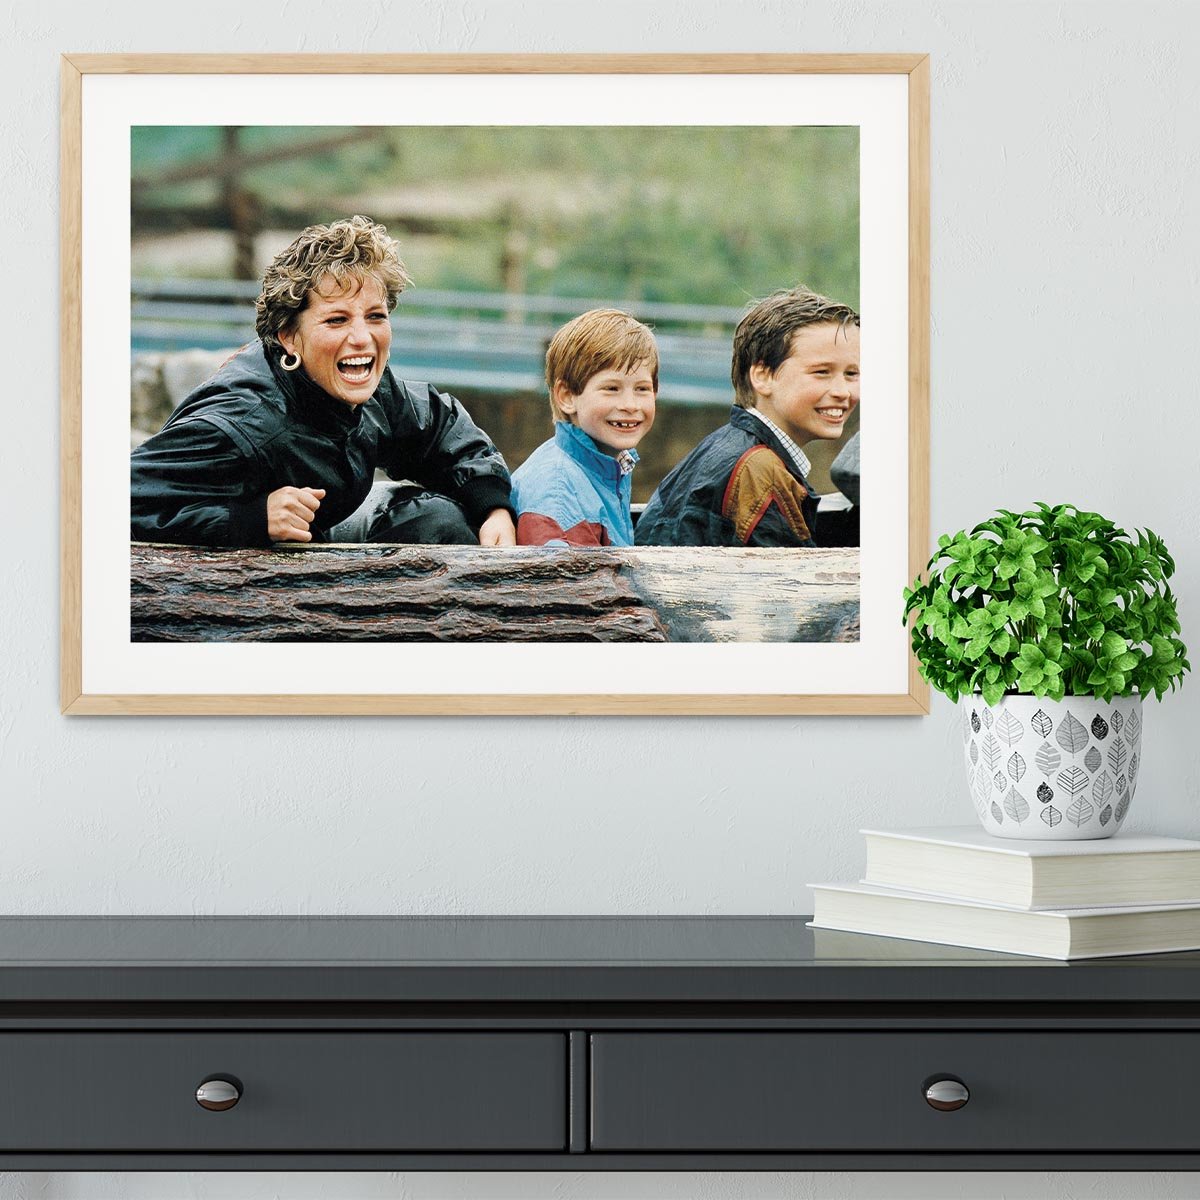 Princess Diana with Prince William and Prince Harry on ride Framed Print - Canvas Art Rocks - 3